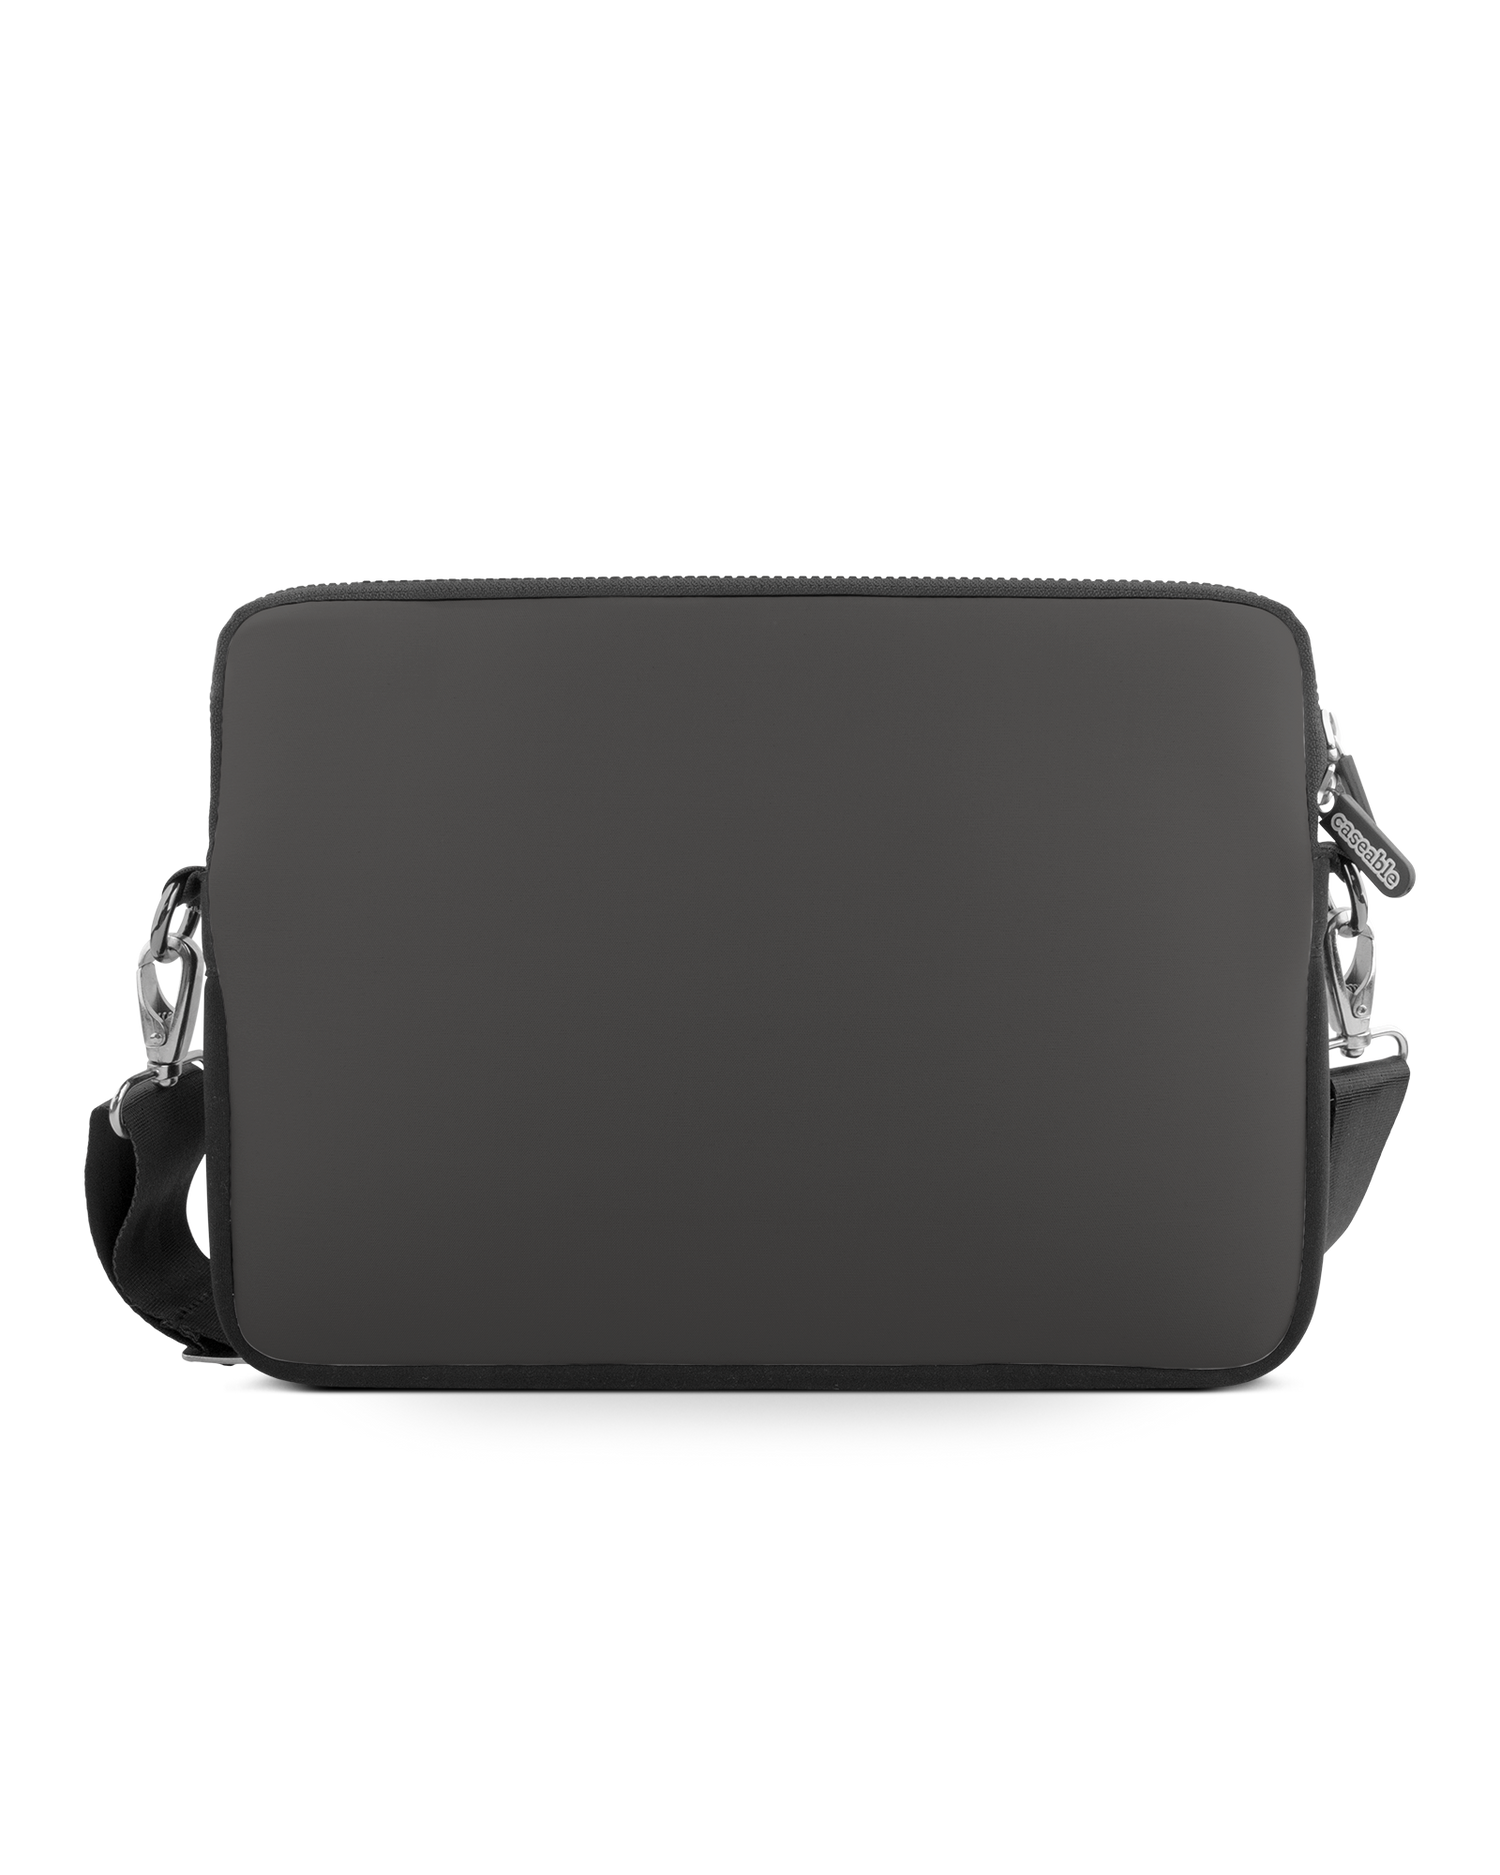 SPACE GREY Premium Laptop Bag 13 inch: Front View